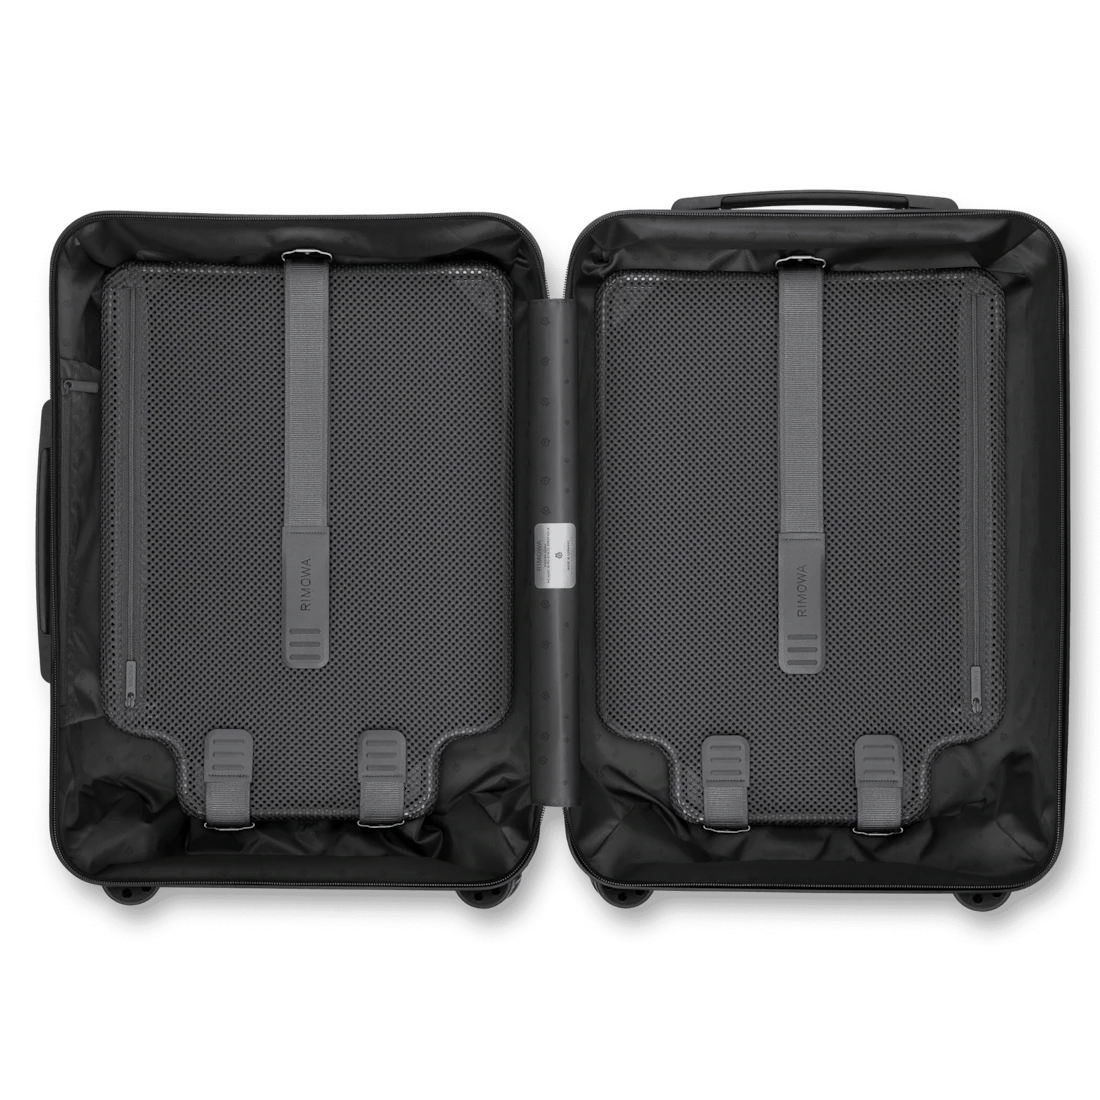 Essential Check-In L Lightweight Suitcase, Black Gloss